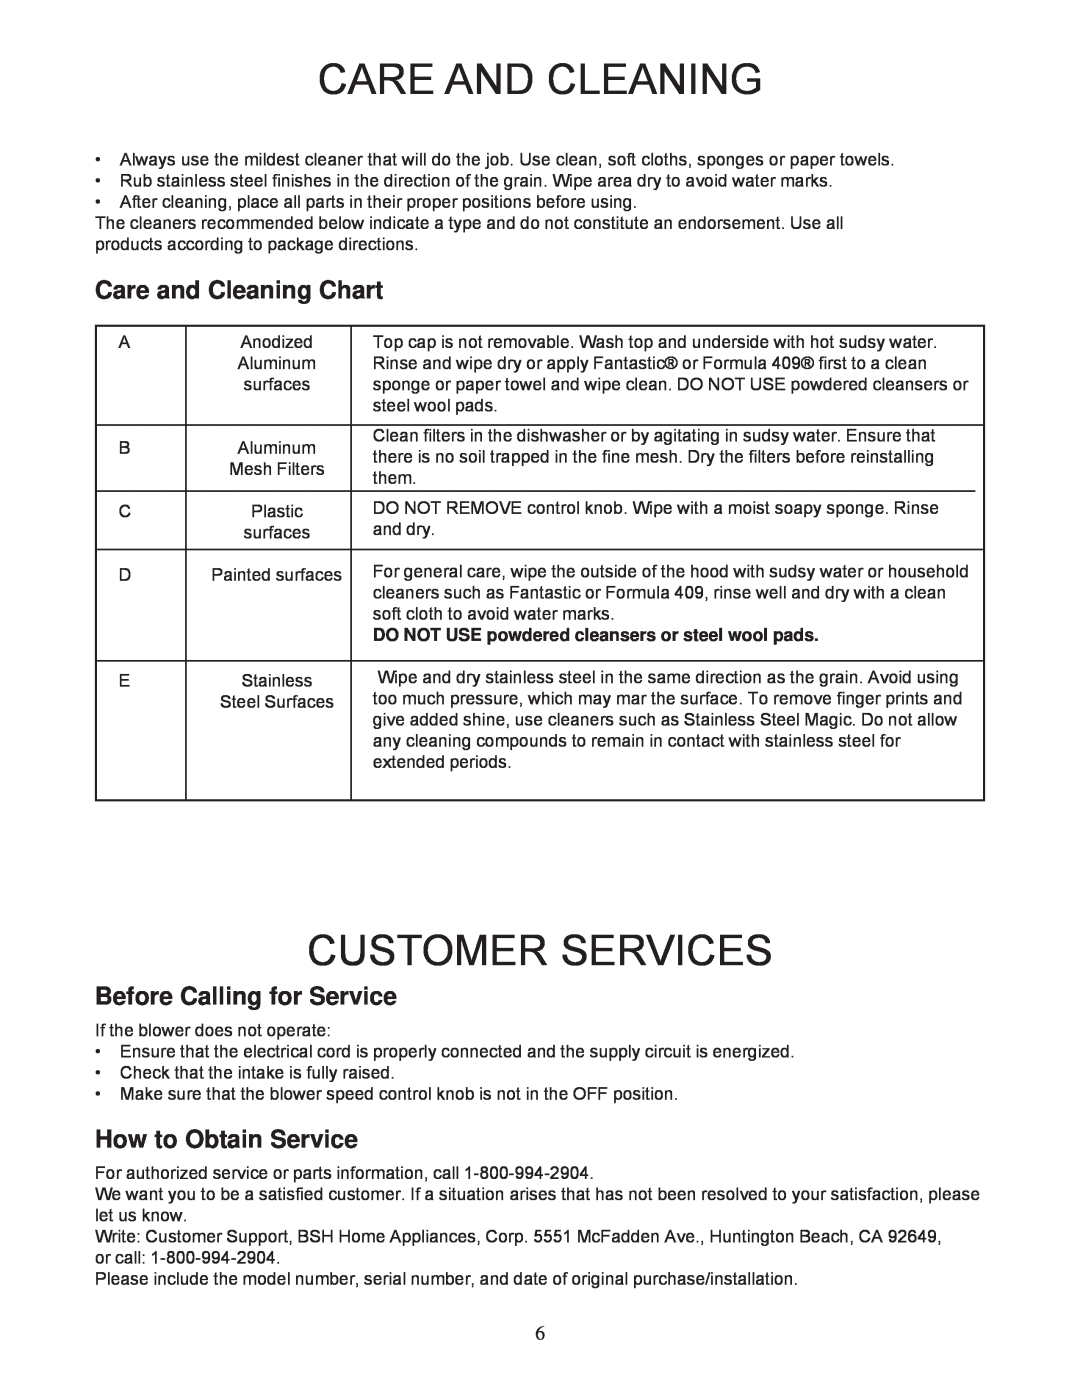 Bosch Appliances DUH30252UC Customer Services, Care and Cleaning Chart, Before Calling for Service, How to Obtain Service 